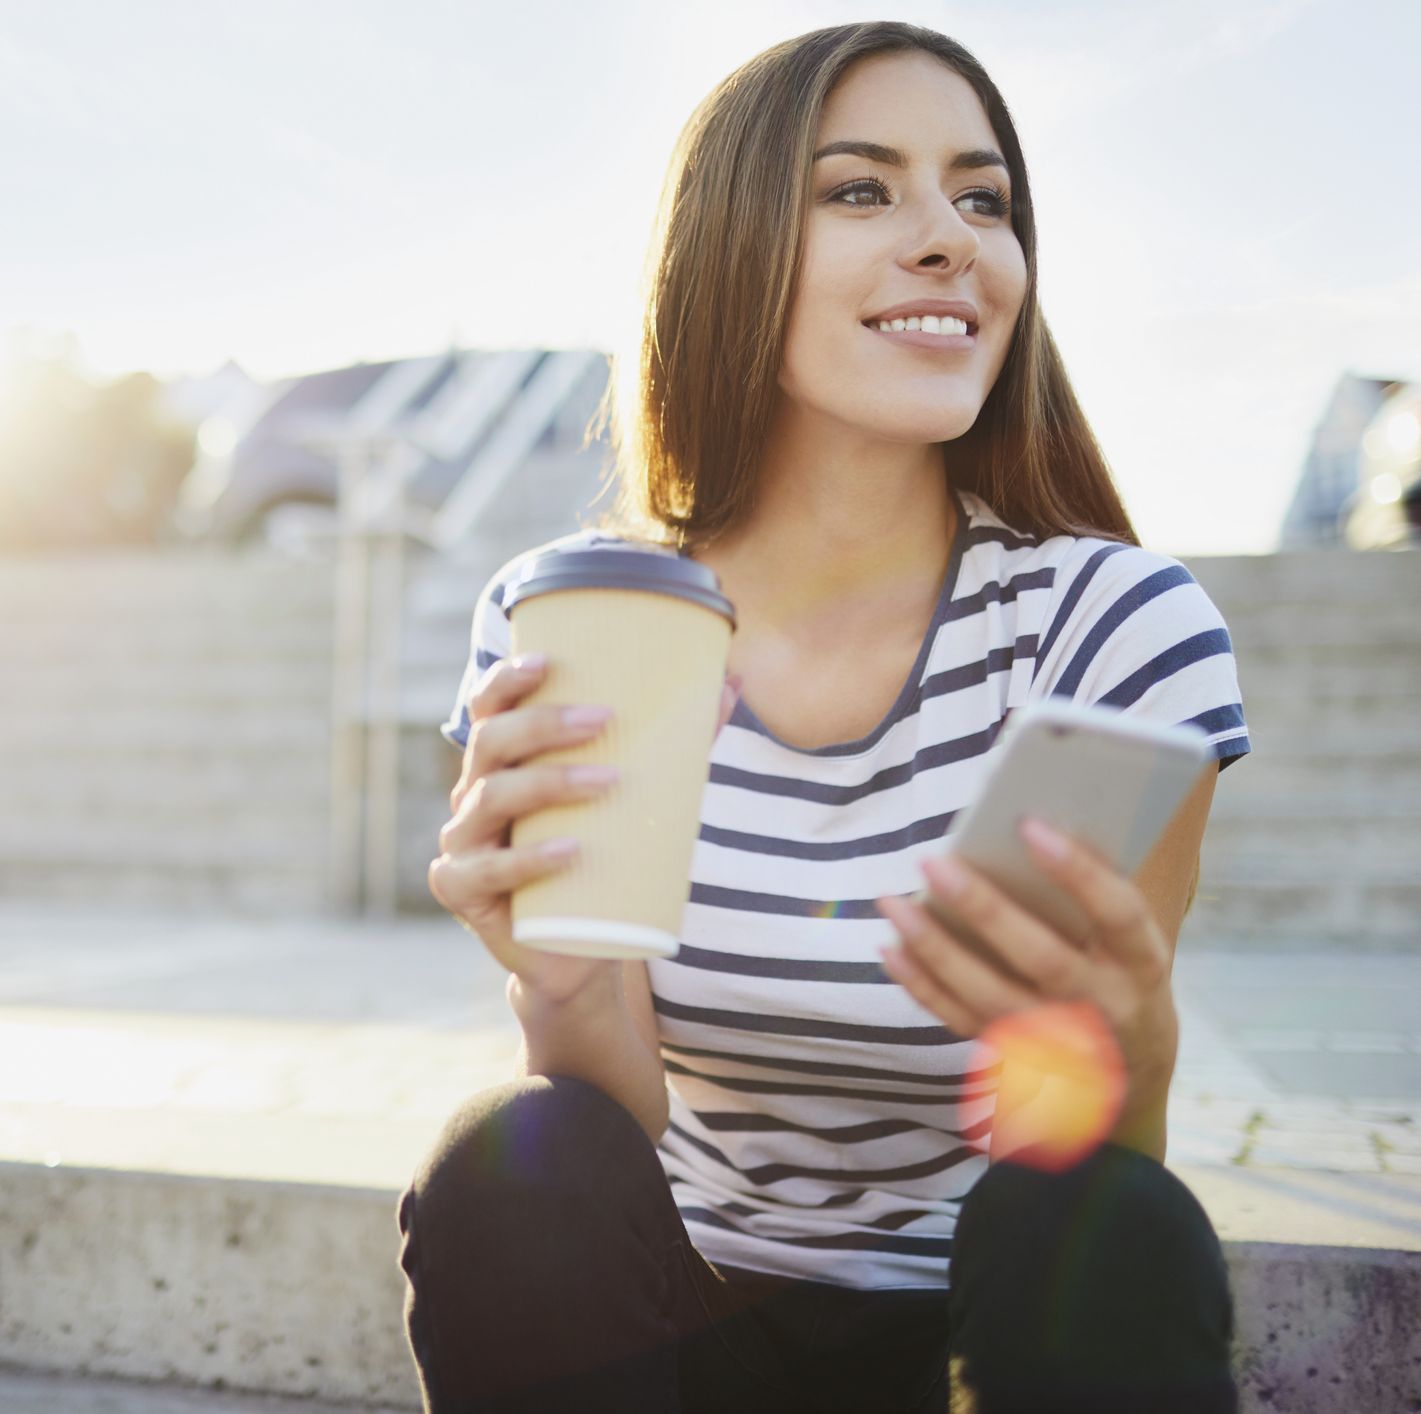 Young woman sitting on stairs in the city with phone and coffee